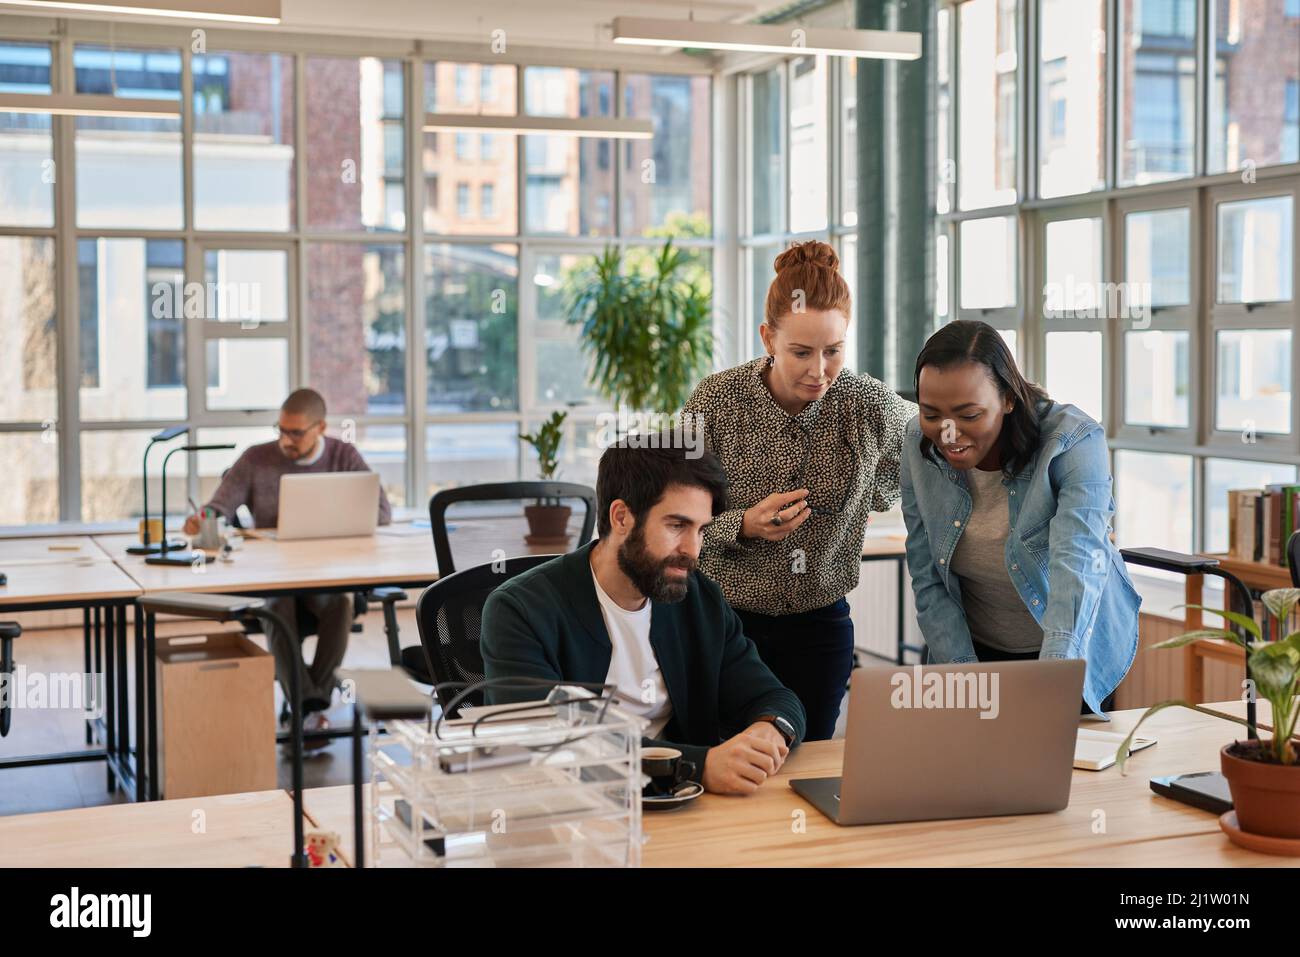 Diverse group of focused businesspeople working on a laptop Stock Photo